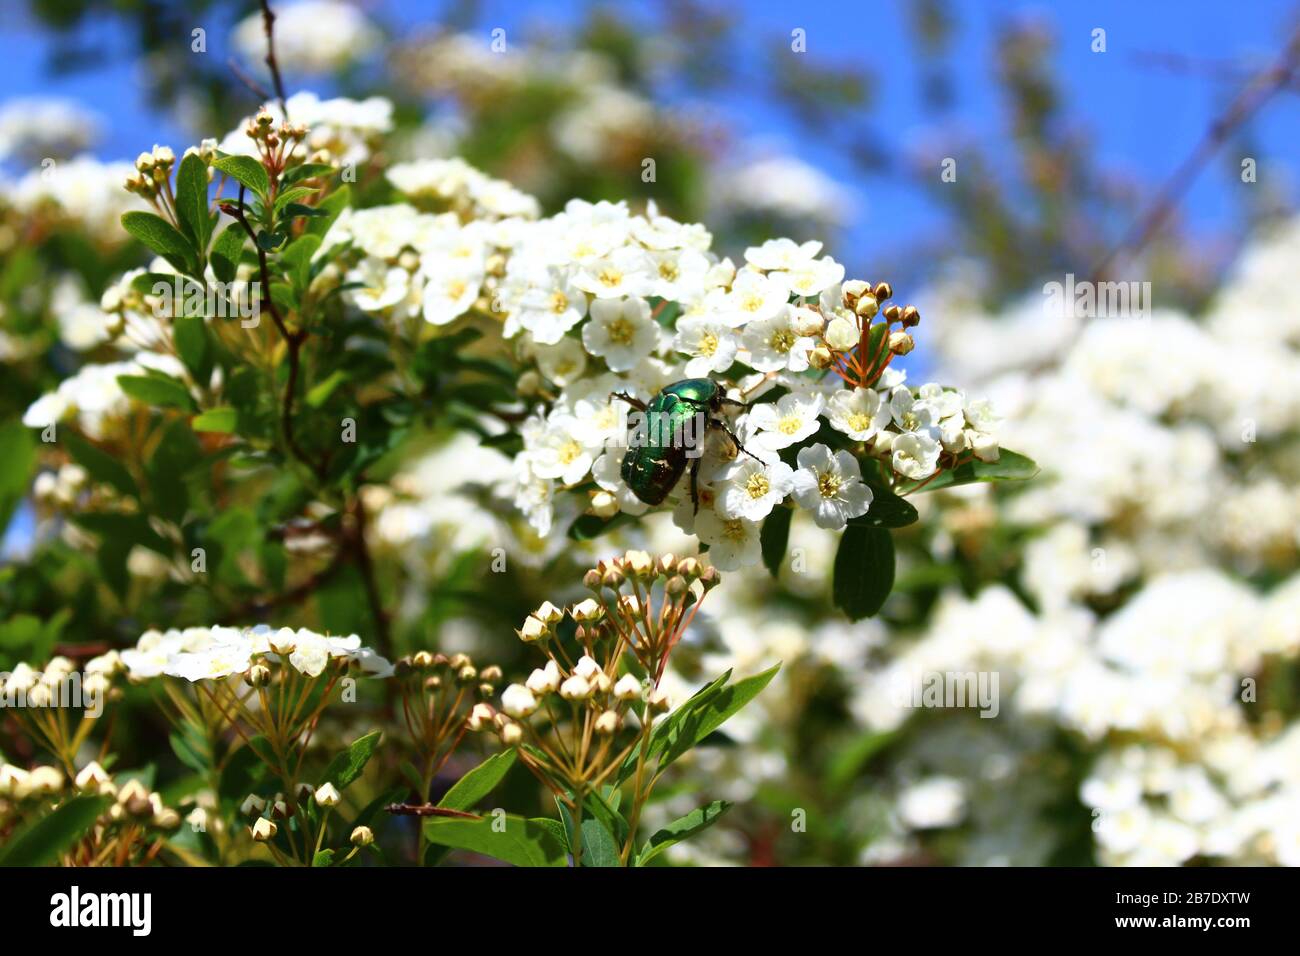 The pictureshows a rose chafer in the snowberry bush Stock Photo